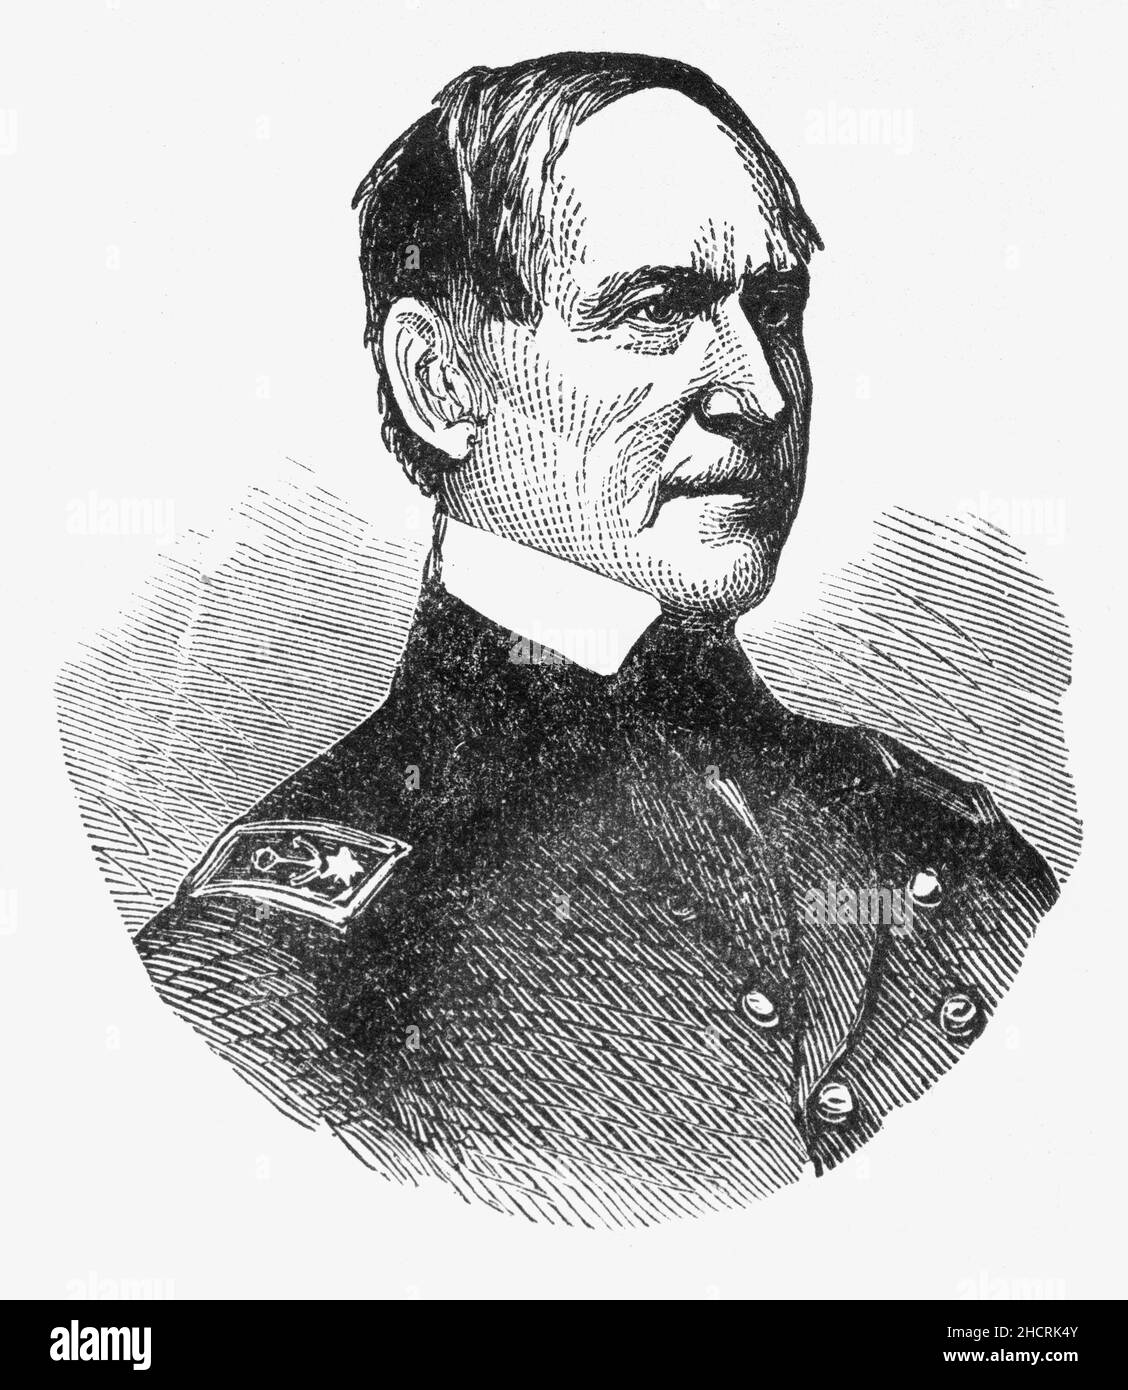 A late 19th Century portrait of David Glasgow Farragut (1801-1870) was a flag officer of the United States Navy during the American Civil War. He was the first rear admiral, vice admiral, and admiral in the United States Navy and is remembered for his order at the Battle of Mobile Bay usually paraphrased as 'Damn the torpedoes, full speed ahead' in U.S. Navy tradition. His last active service was in command of the European Squadron, from 1867 to 1868, with the screw frigate USS Franklin as his flagship. Farragut remained on active duty for life, an honor accorded to only seven other U.S. Navy Stock Photo